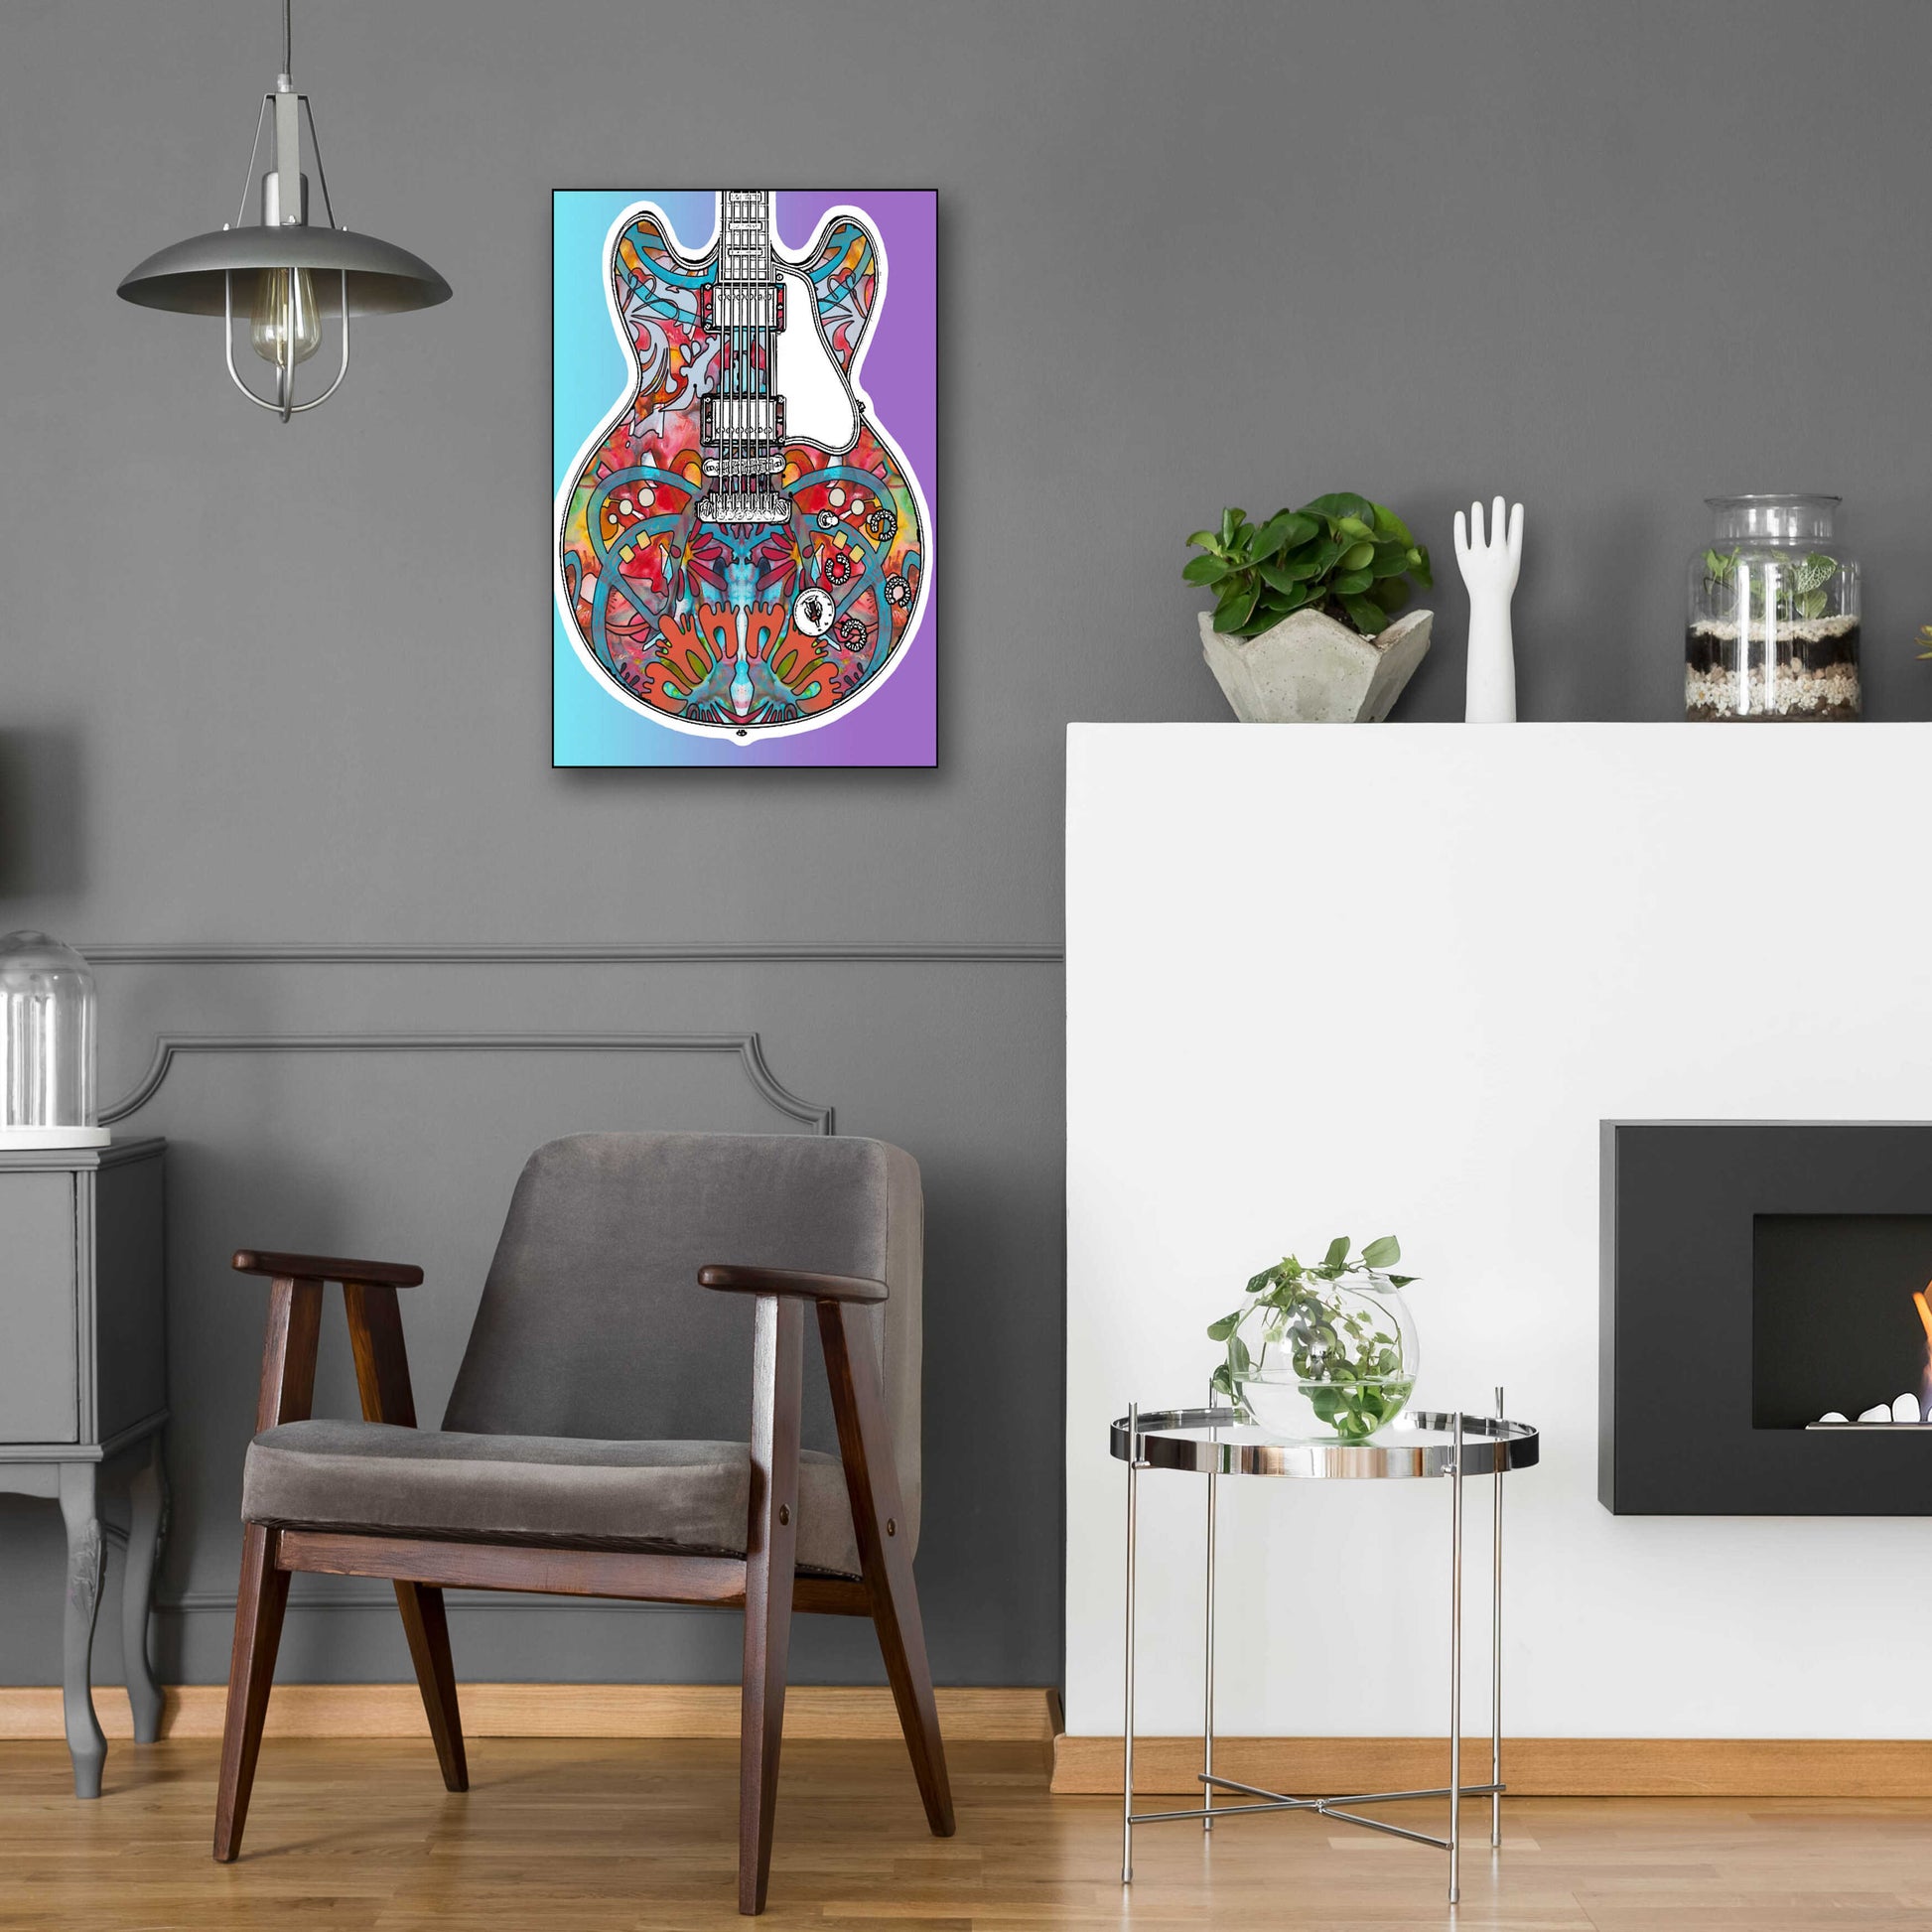 Epic Art 'Gibson ES-355' by Dean Russo, Acrylic Glass Wall Art,16x24